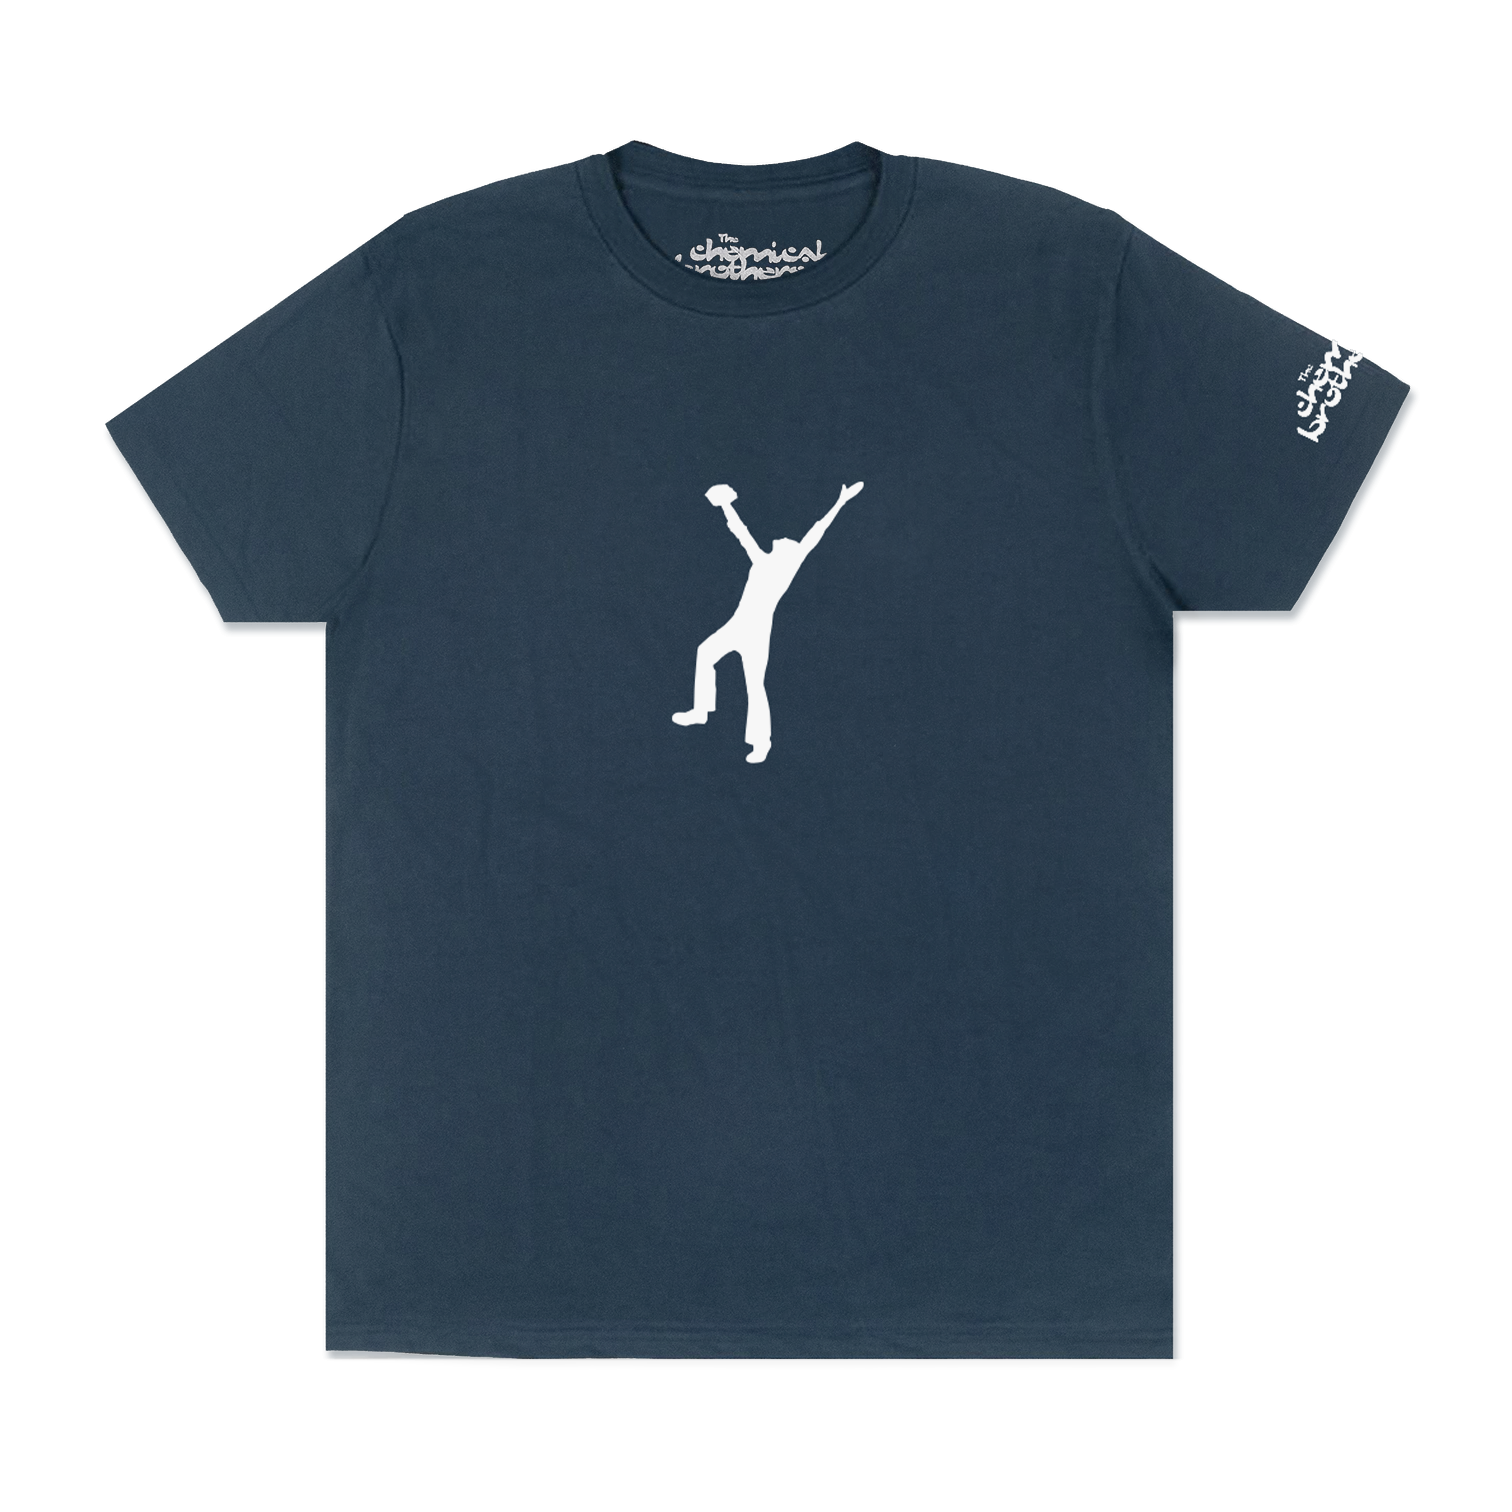 SPECIAL EDITION SURRENDER SILHOUETTE BLUE T-SHIRT